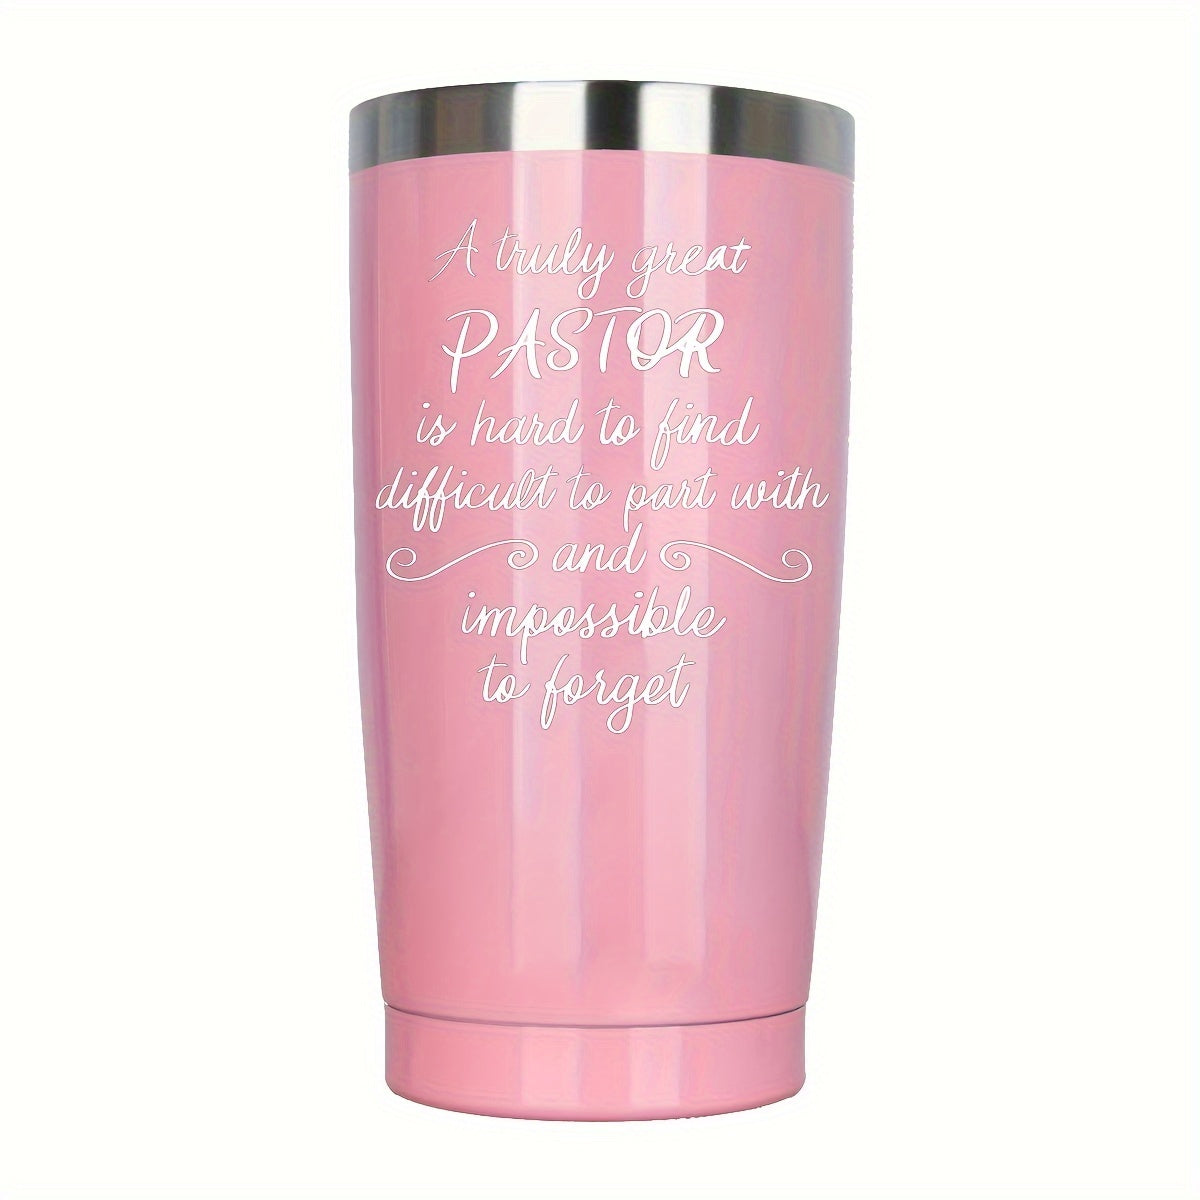 A Truly Great Pastor Christian Insulated Tumbler 20oz claimedbygoddesigns